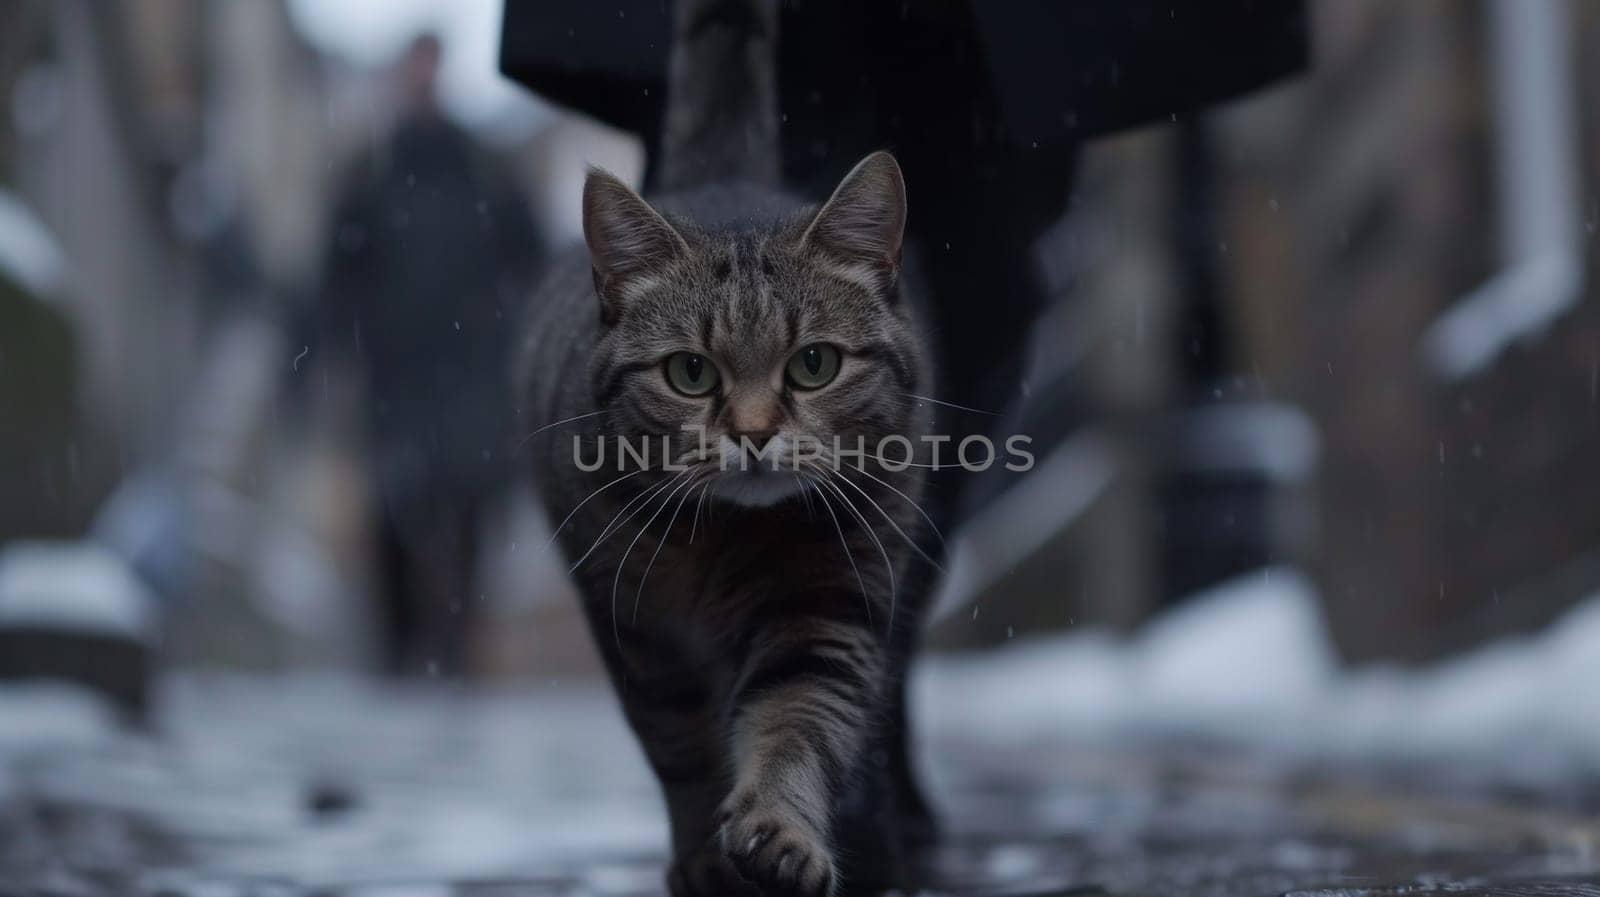 A cat walking down a sidewalk in the rain with people behind it